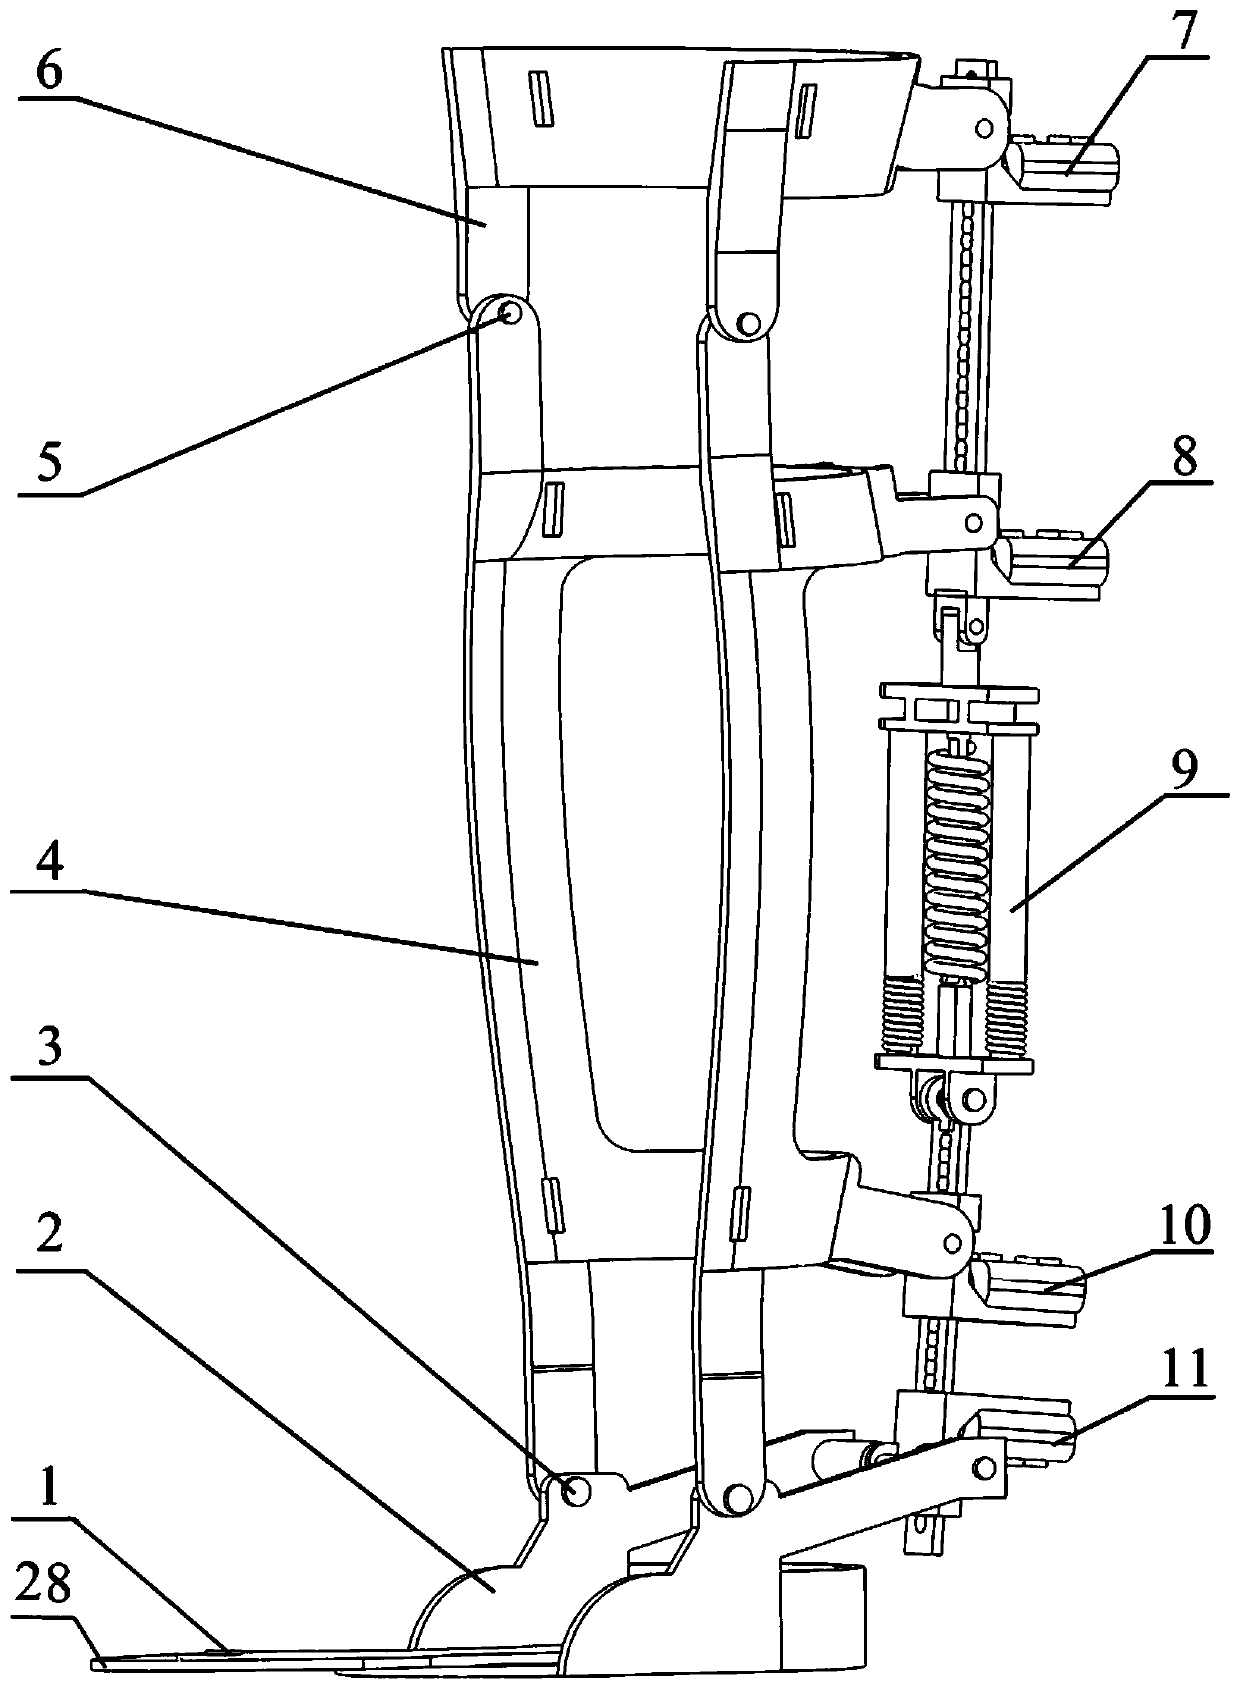 A passive lower extremity exoskeleton device for energy transfer in the human body